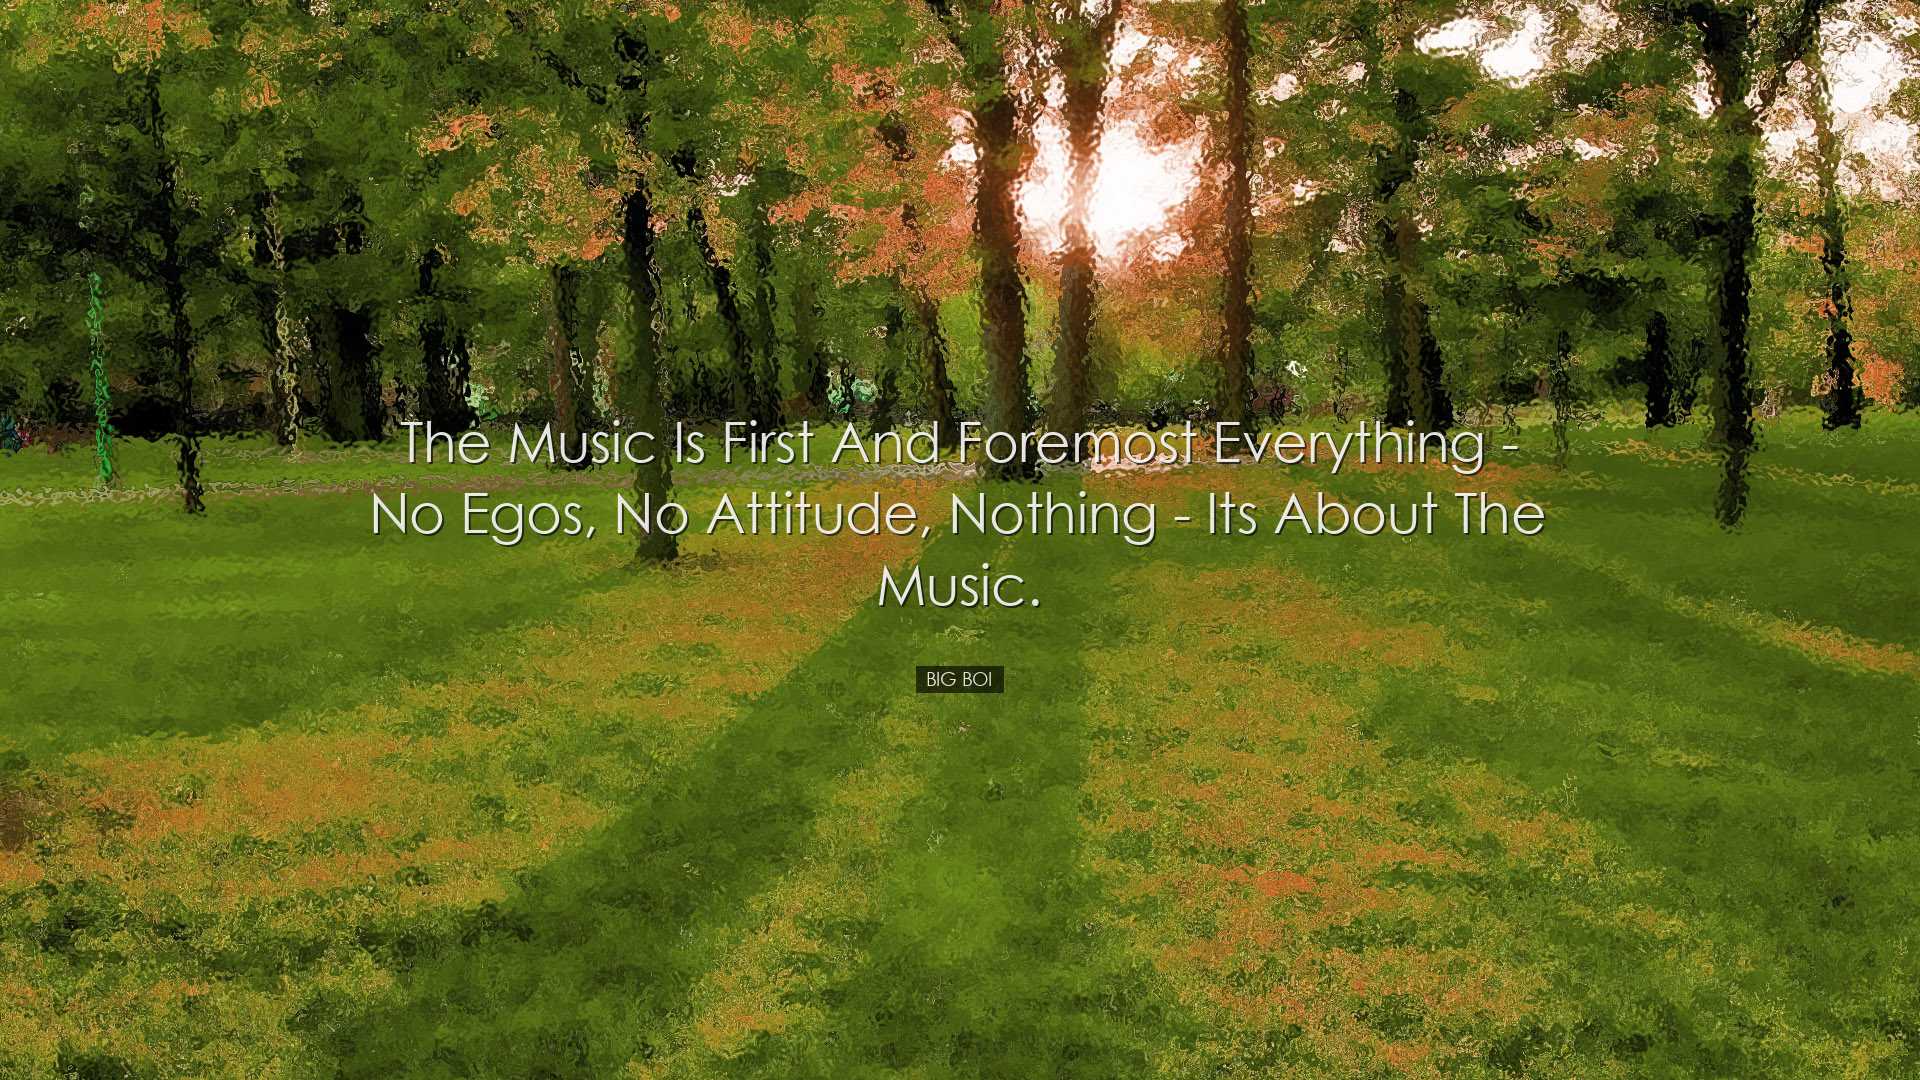 The music is first and foremost everything - no egos, no attitude,